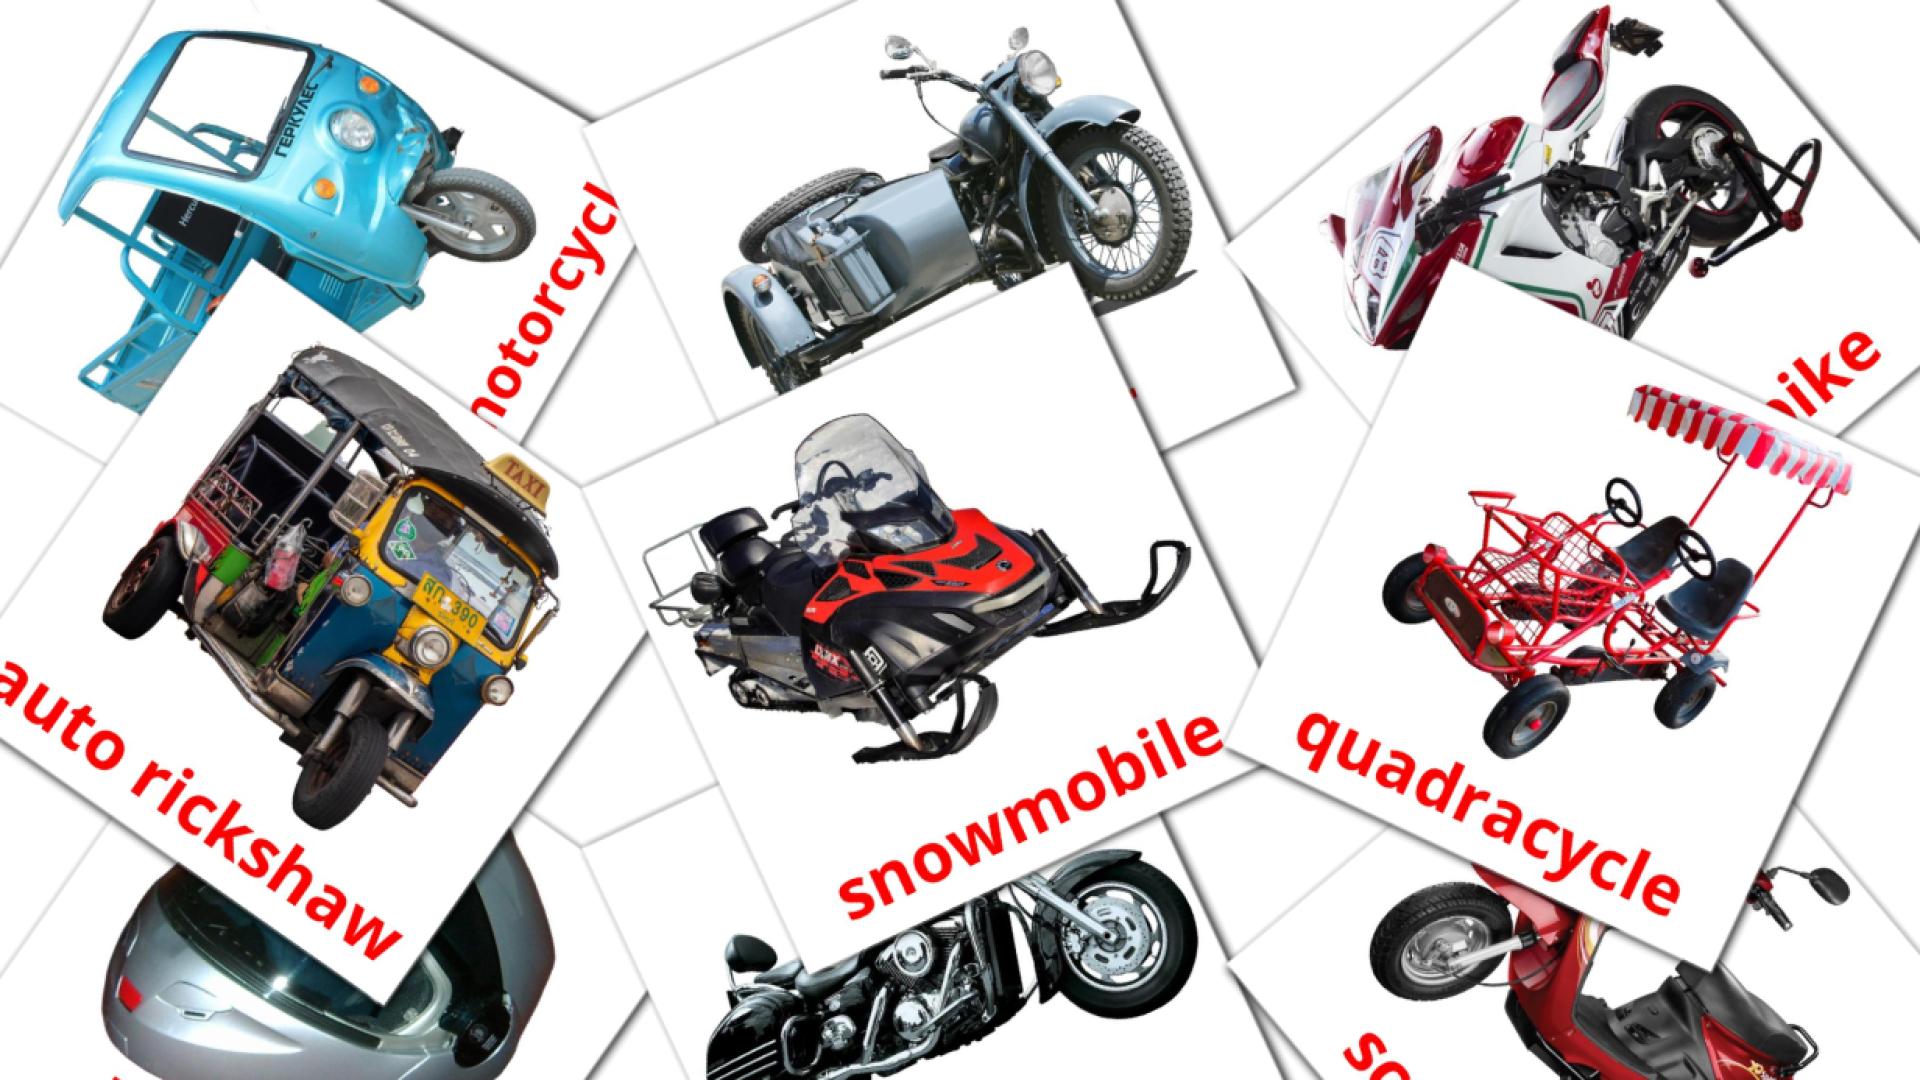 14 Imagiers Motorcycles